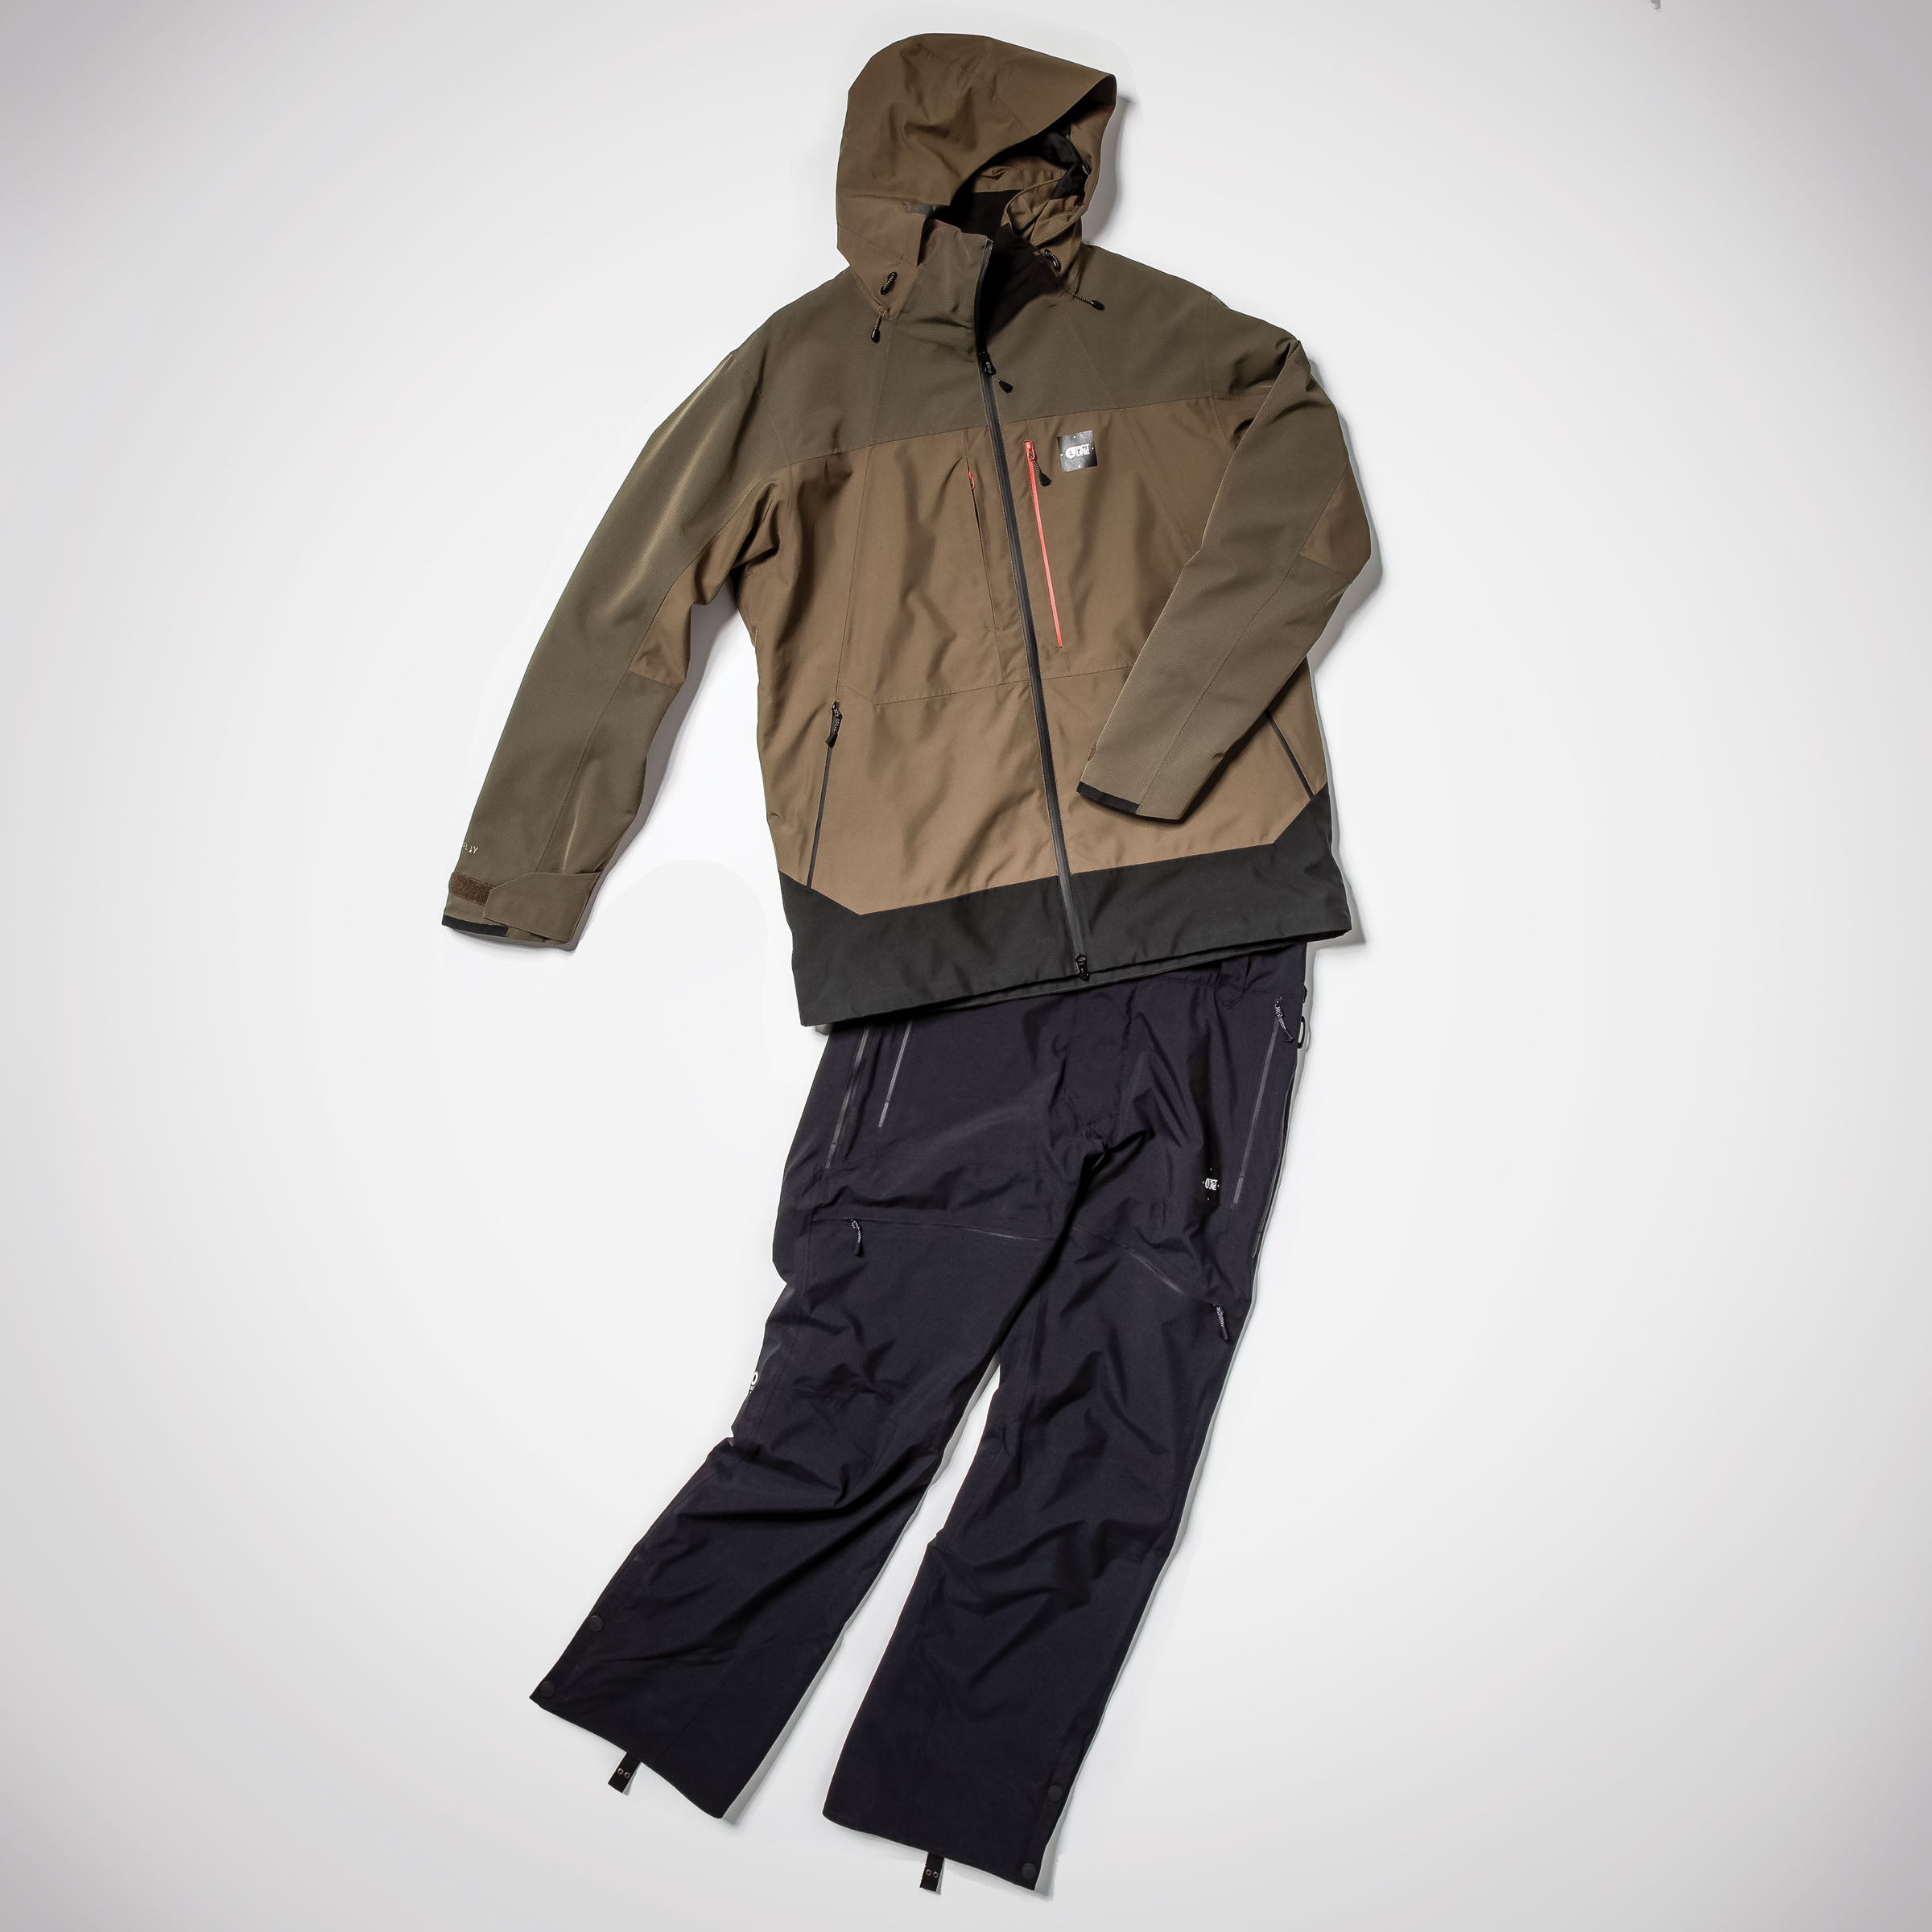 What to Wear  How to Dress for Skiing  Snowboarding  evo